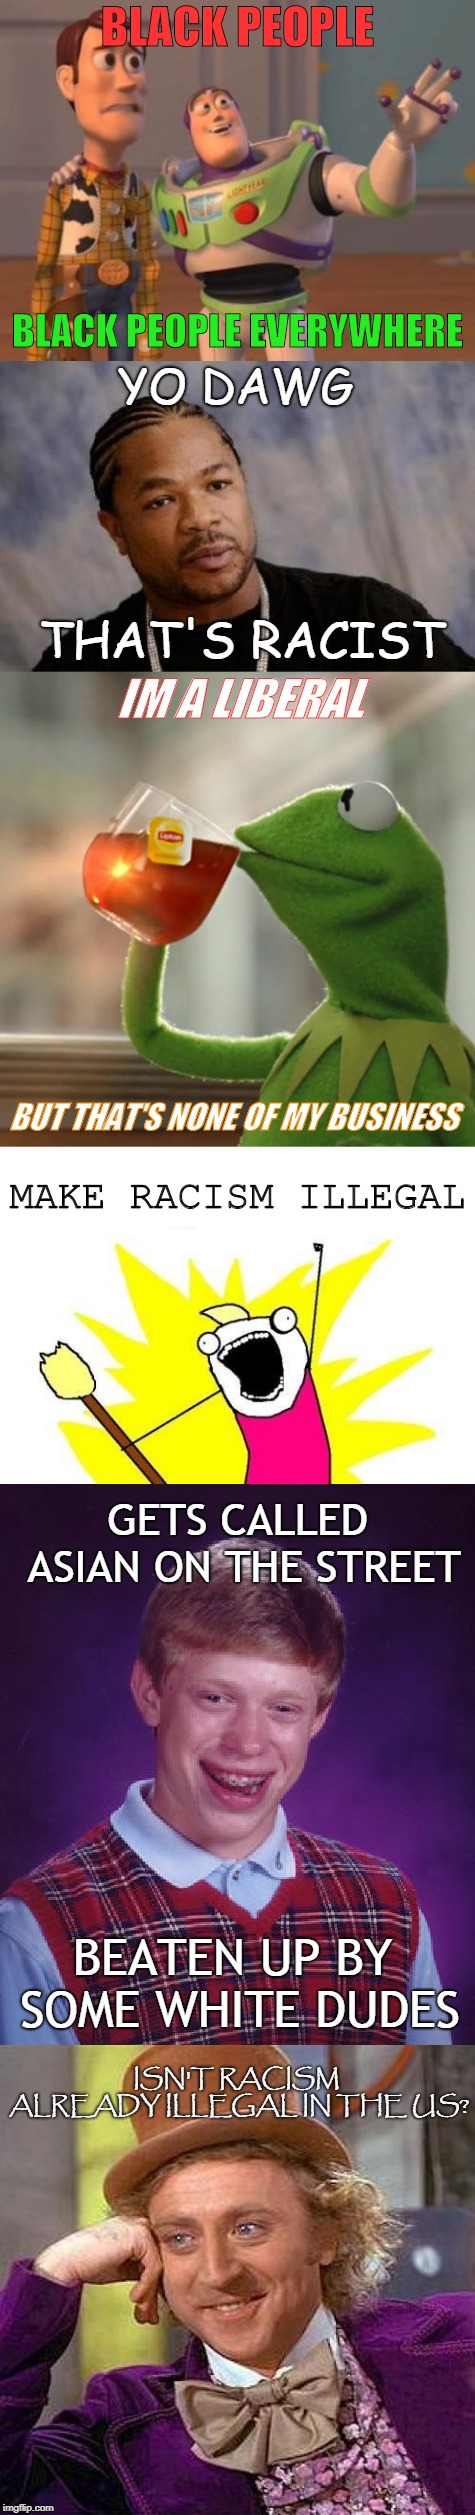 Liberals and Racism | BLACK PEOPLE; BLACK PEOPLE EVERYWHERE; YO DAWG; THAT'S RACIST; IM A LIBERAL; BUT THAT'S NONE OF MY BUSINESS; MAKE RACISM ILLEGAL; GETS CALLED ASIAN ON THE STREET; BEATEN UP BY SOME WHITE DUDES; ISN'T RACISM ALREADY ILLEGAL IN THE US? | image tagged in liberals,racism,x x everywhere,yo dawg,but thats none of my business,memes | made w/ Imgflip meme maker